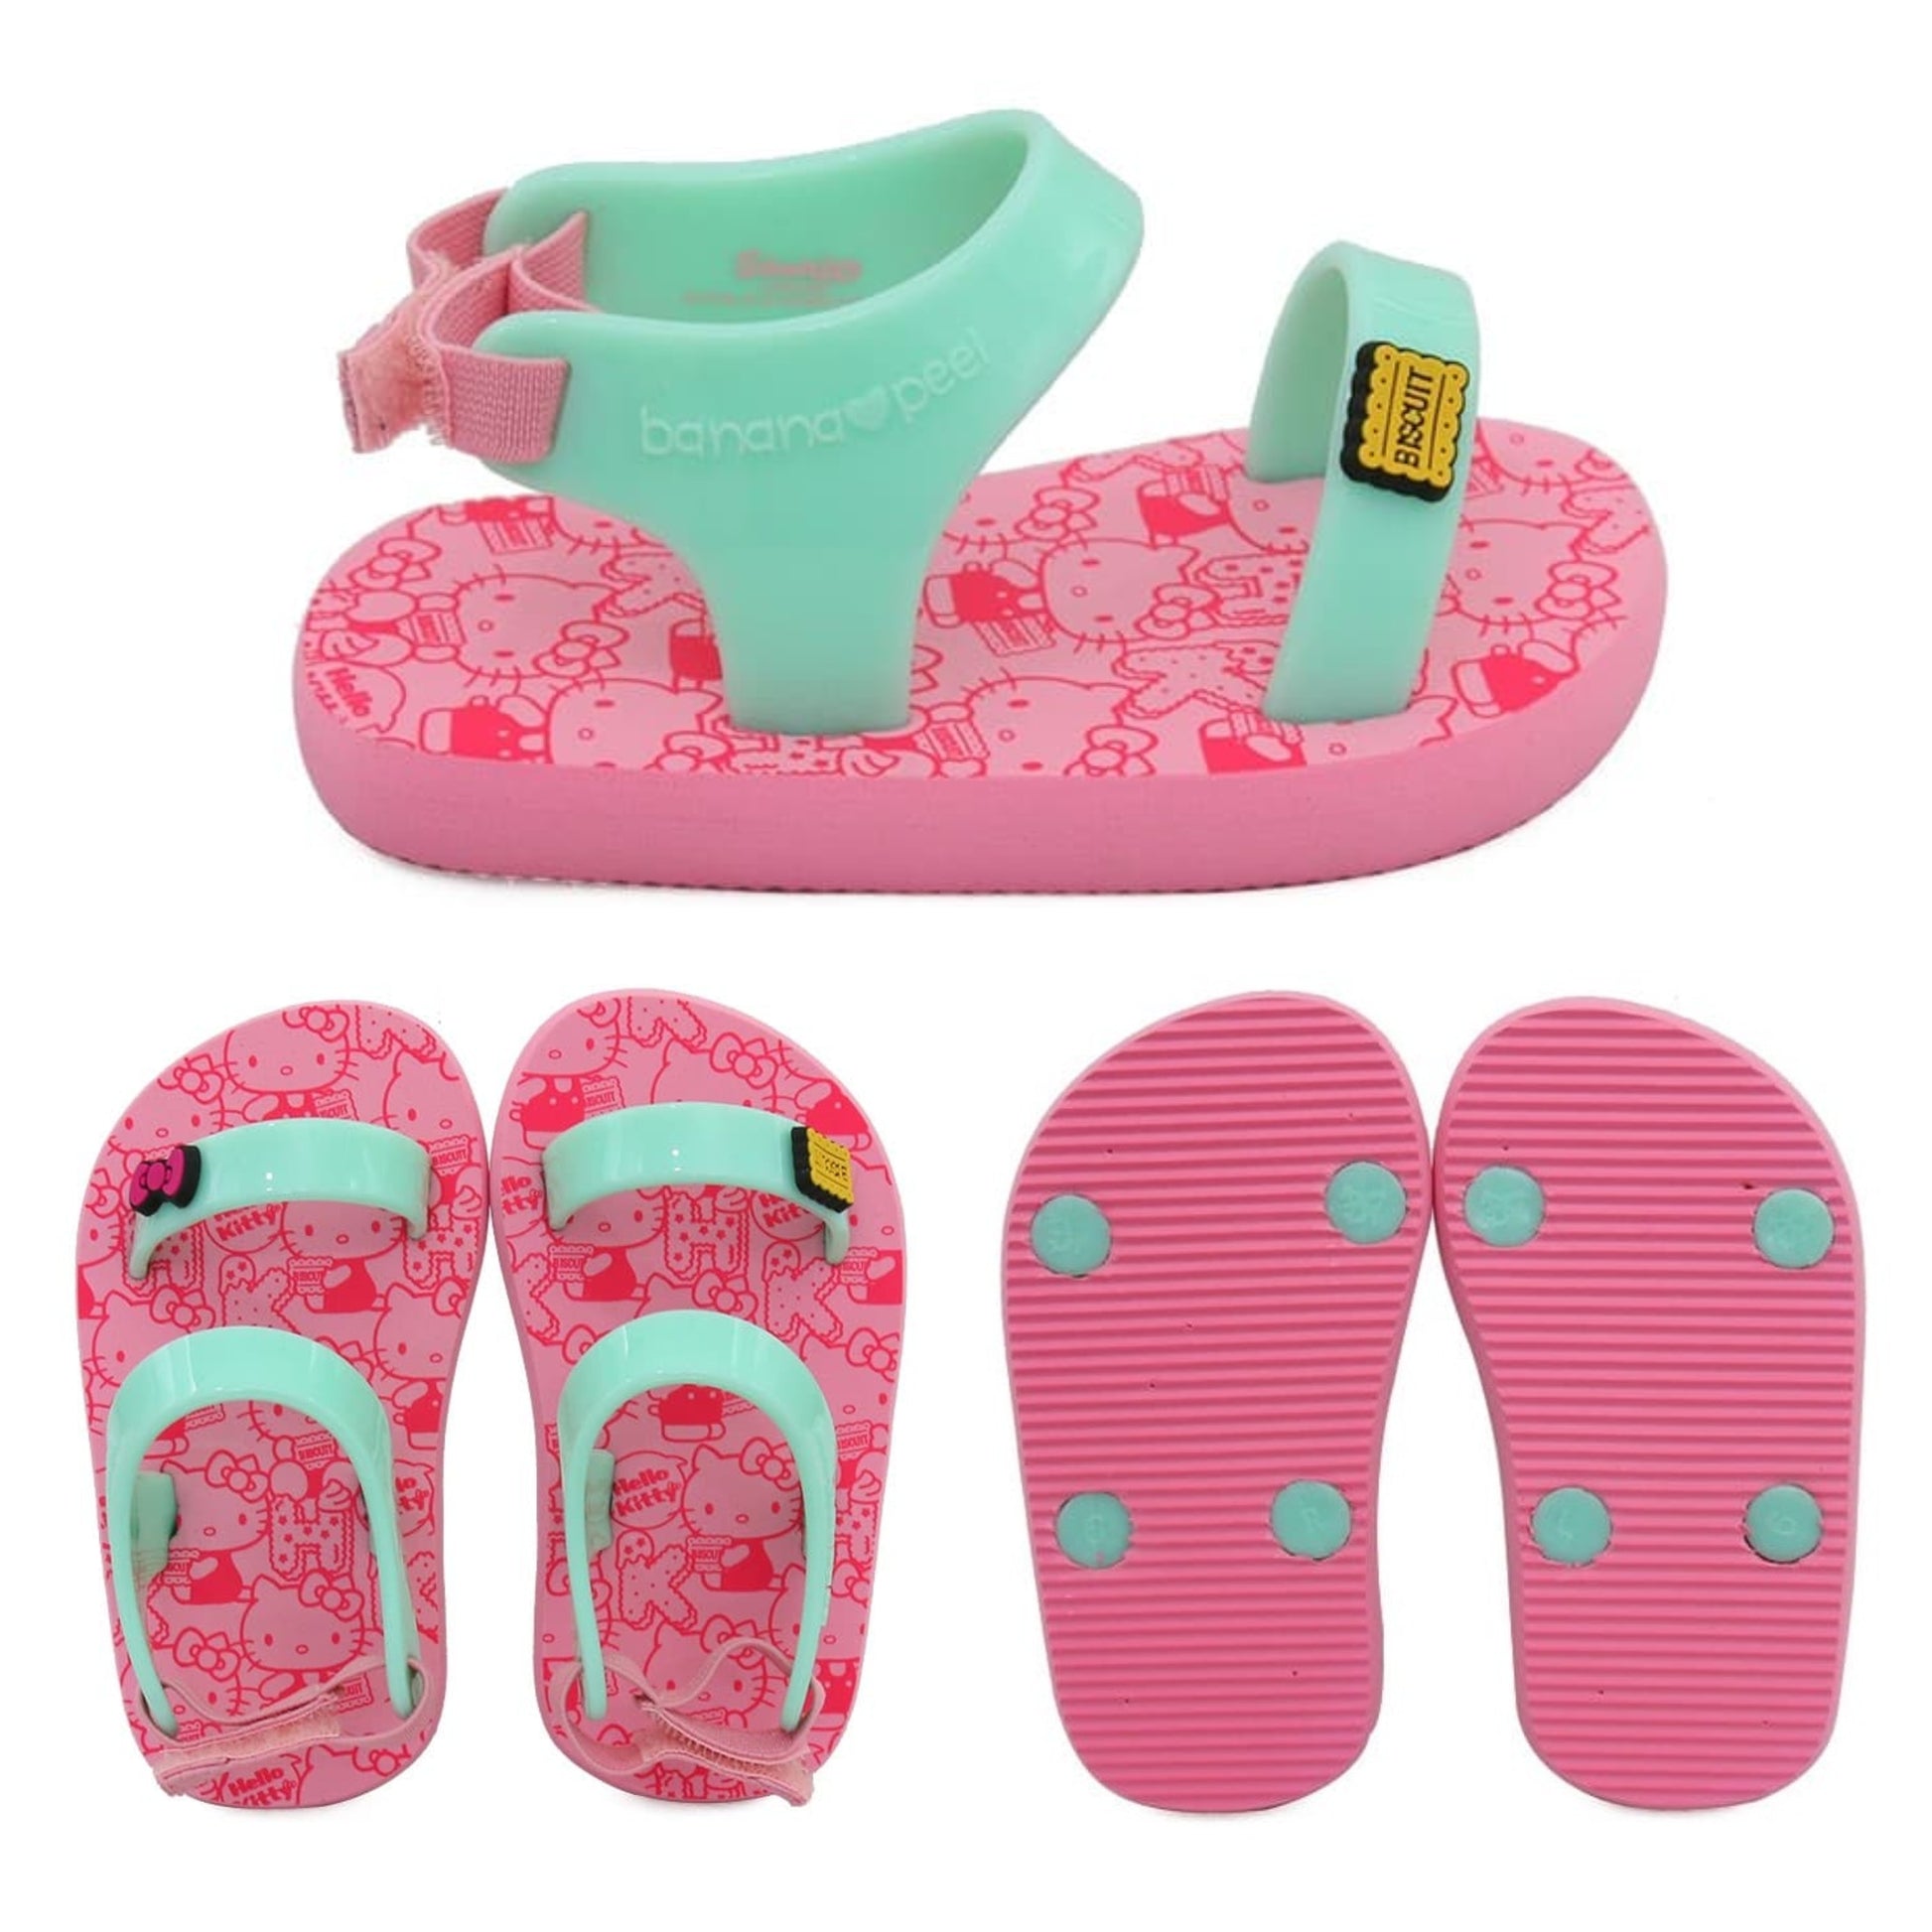 Banana Peel Slippers for Toddlers - Hello Kitty Set Assorted Biscuit Pink - MYSTYLEMYCLOTHING